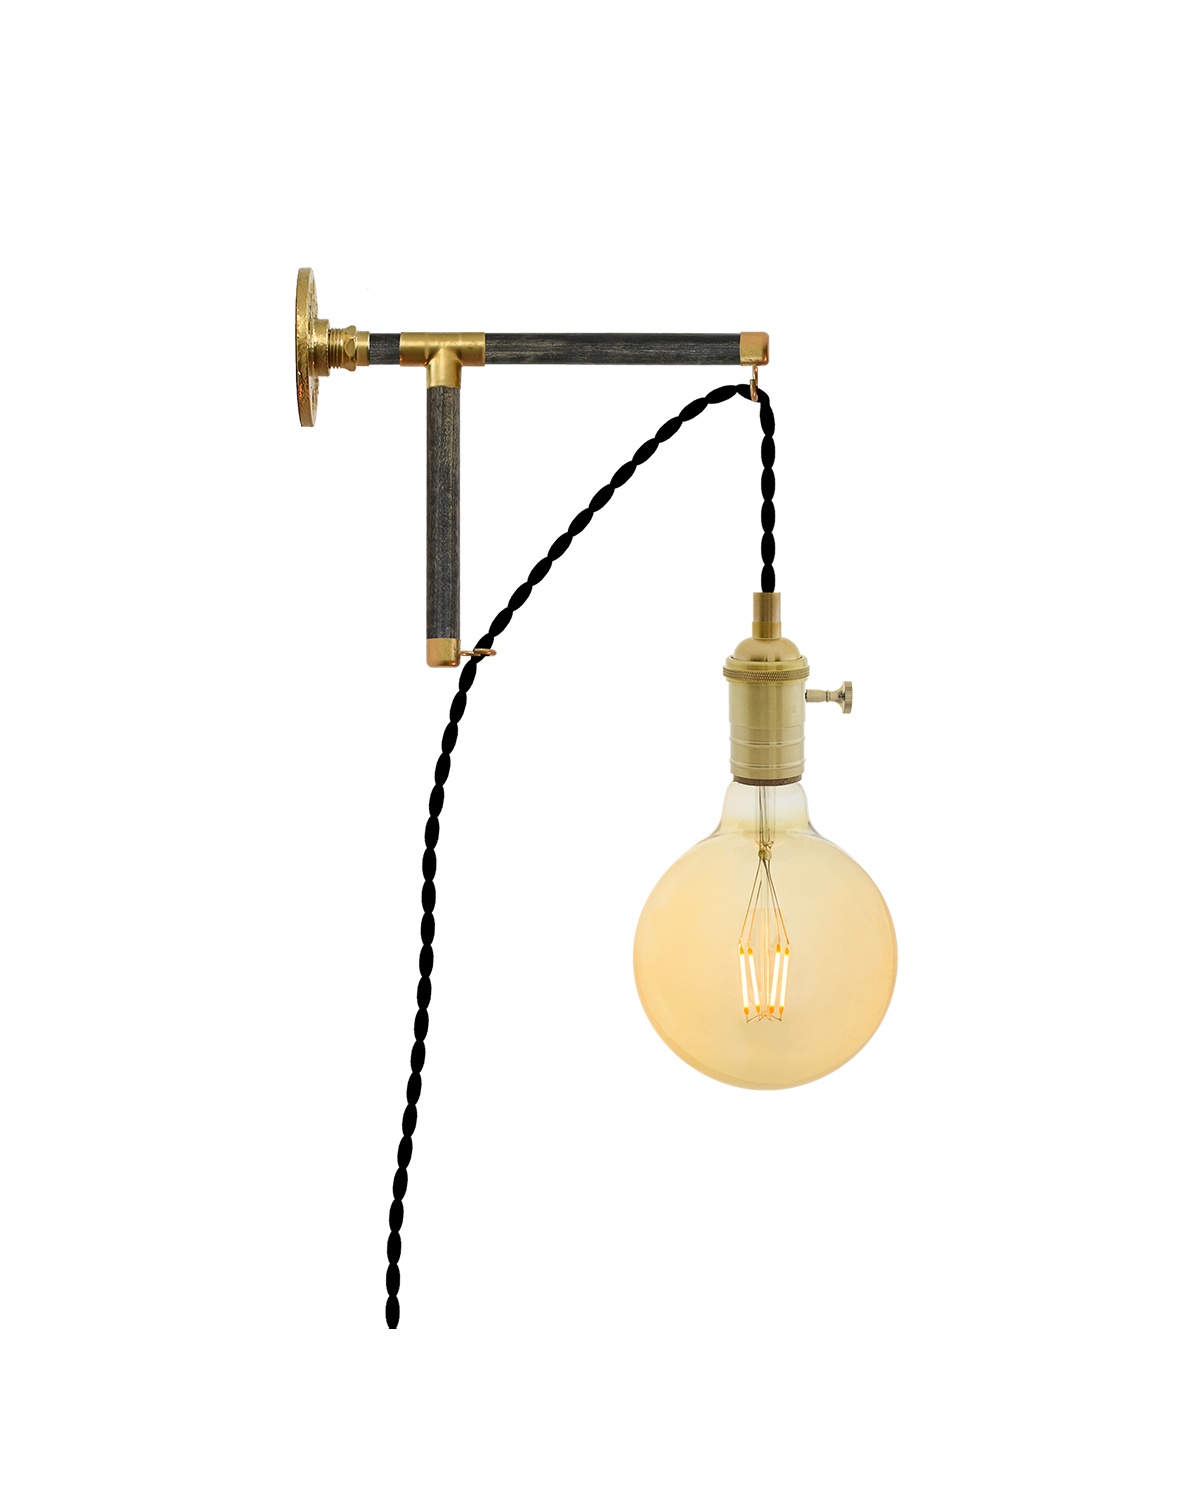 Plug-in L-Bracket Wall Sconce: Black and Brass Hangout Lighting 